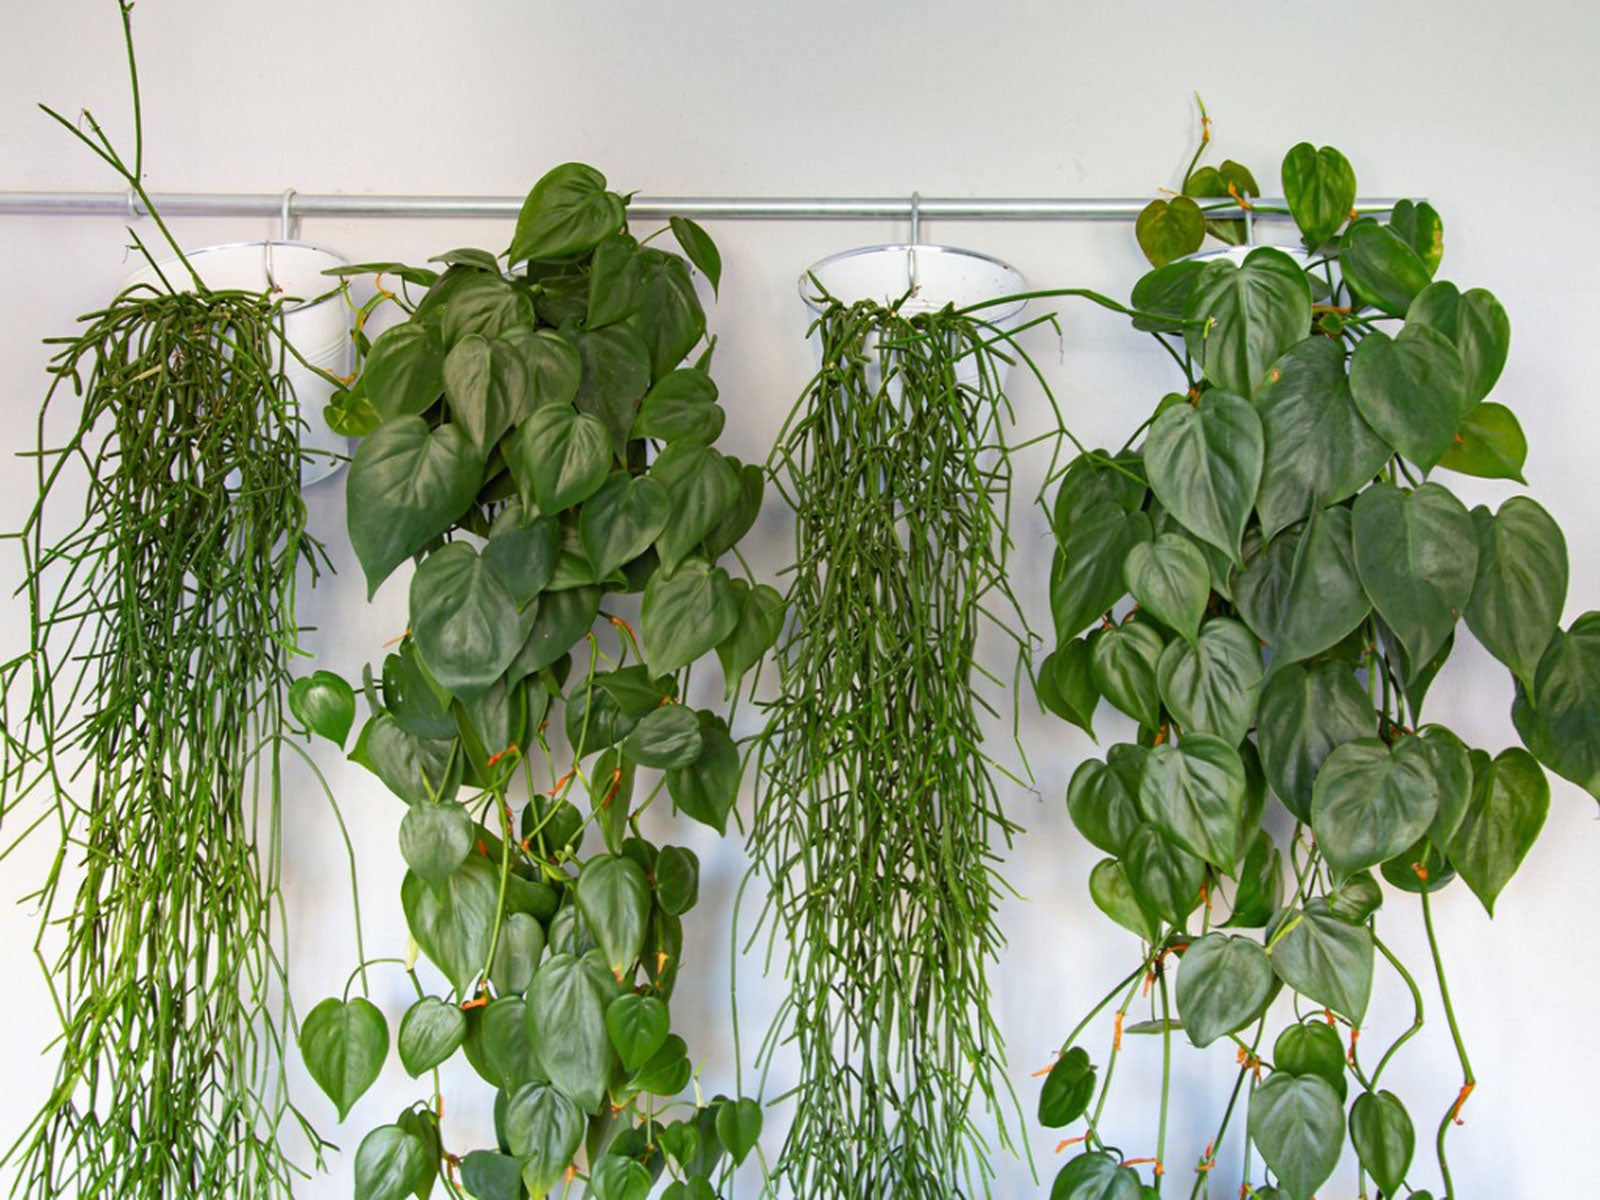 Green Curtain Garden Info: Planting Green Curtains Indoors Or Out